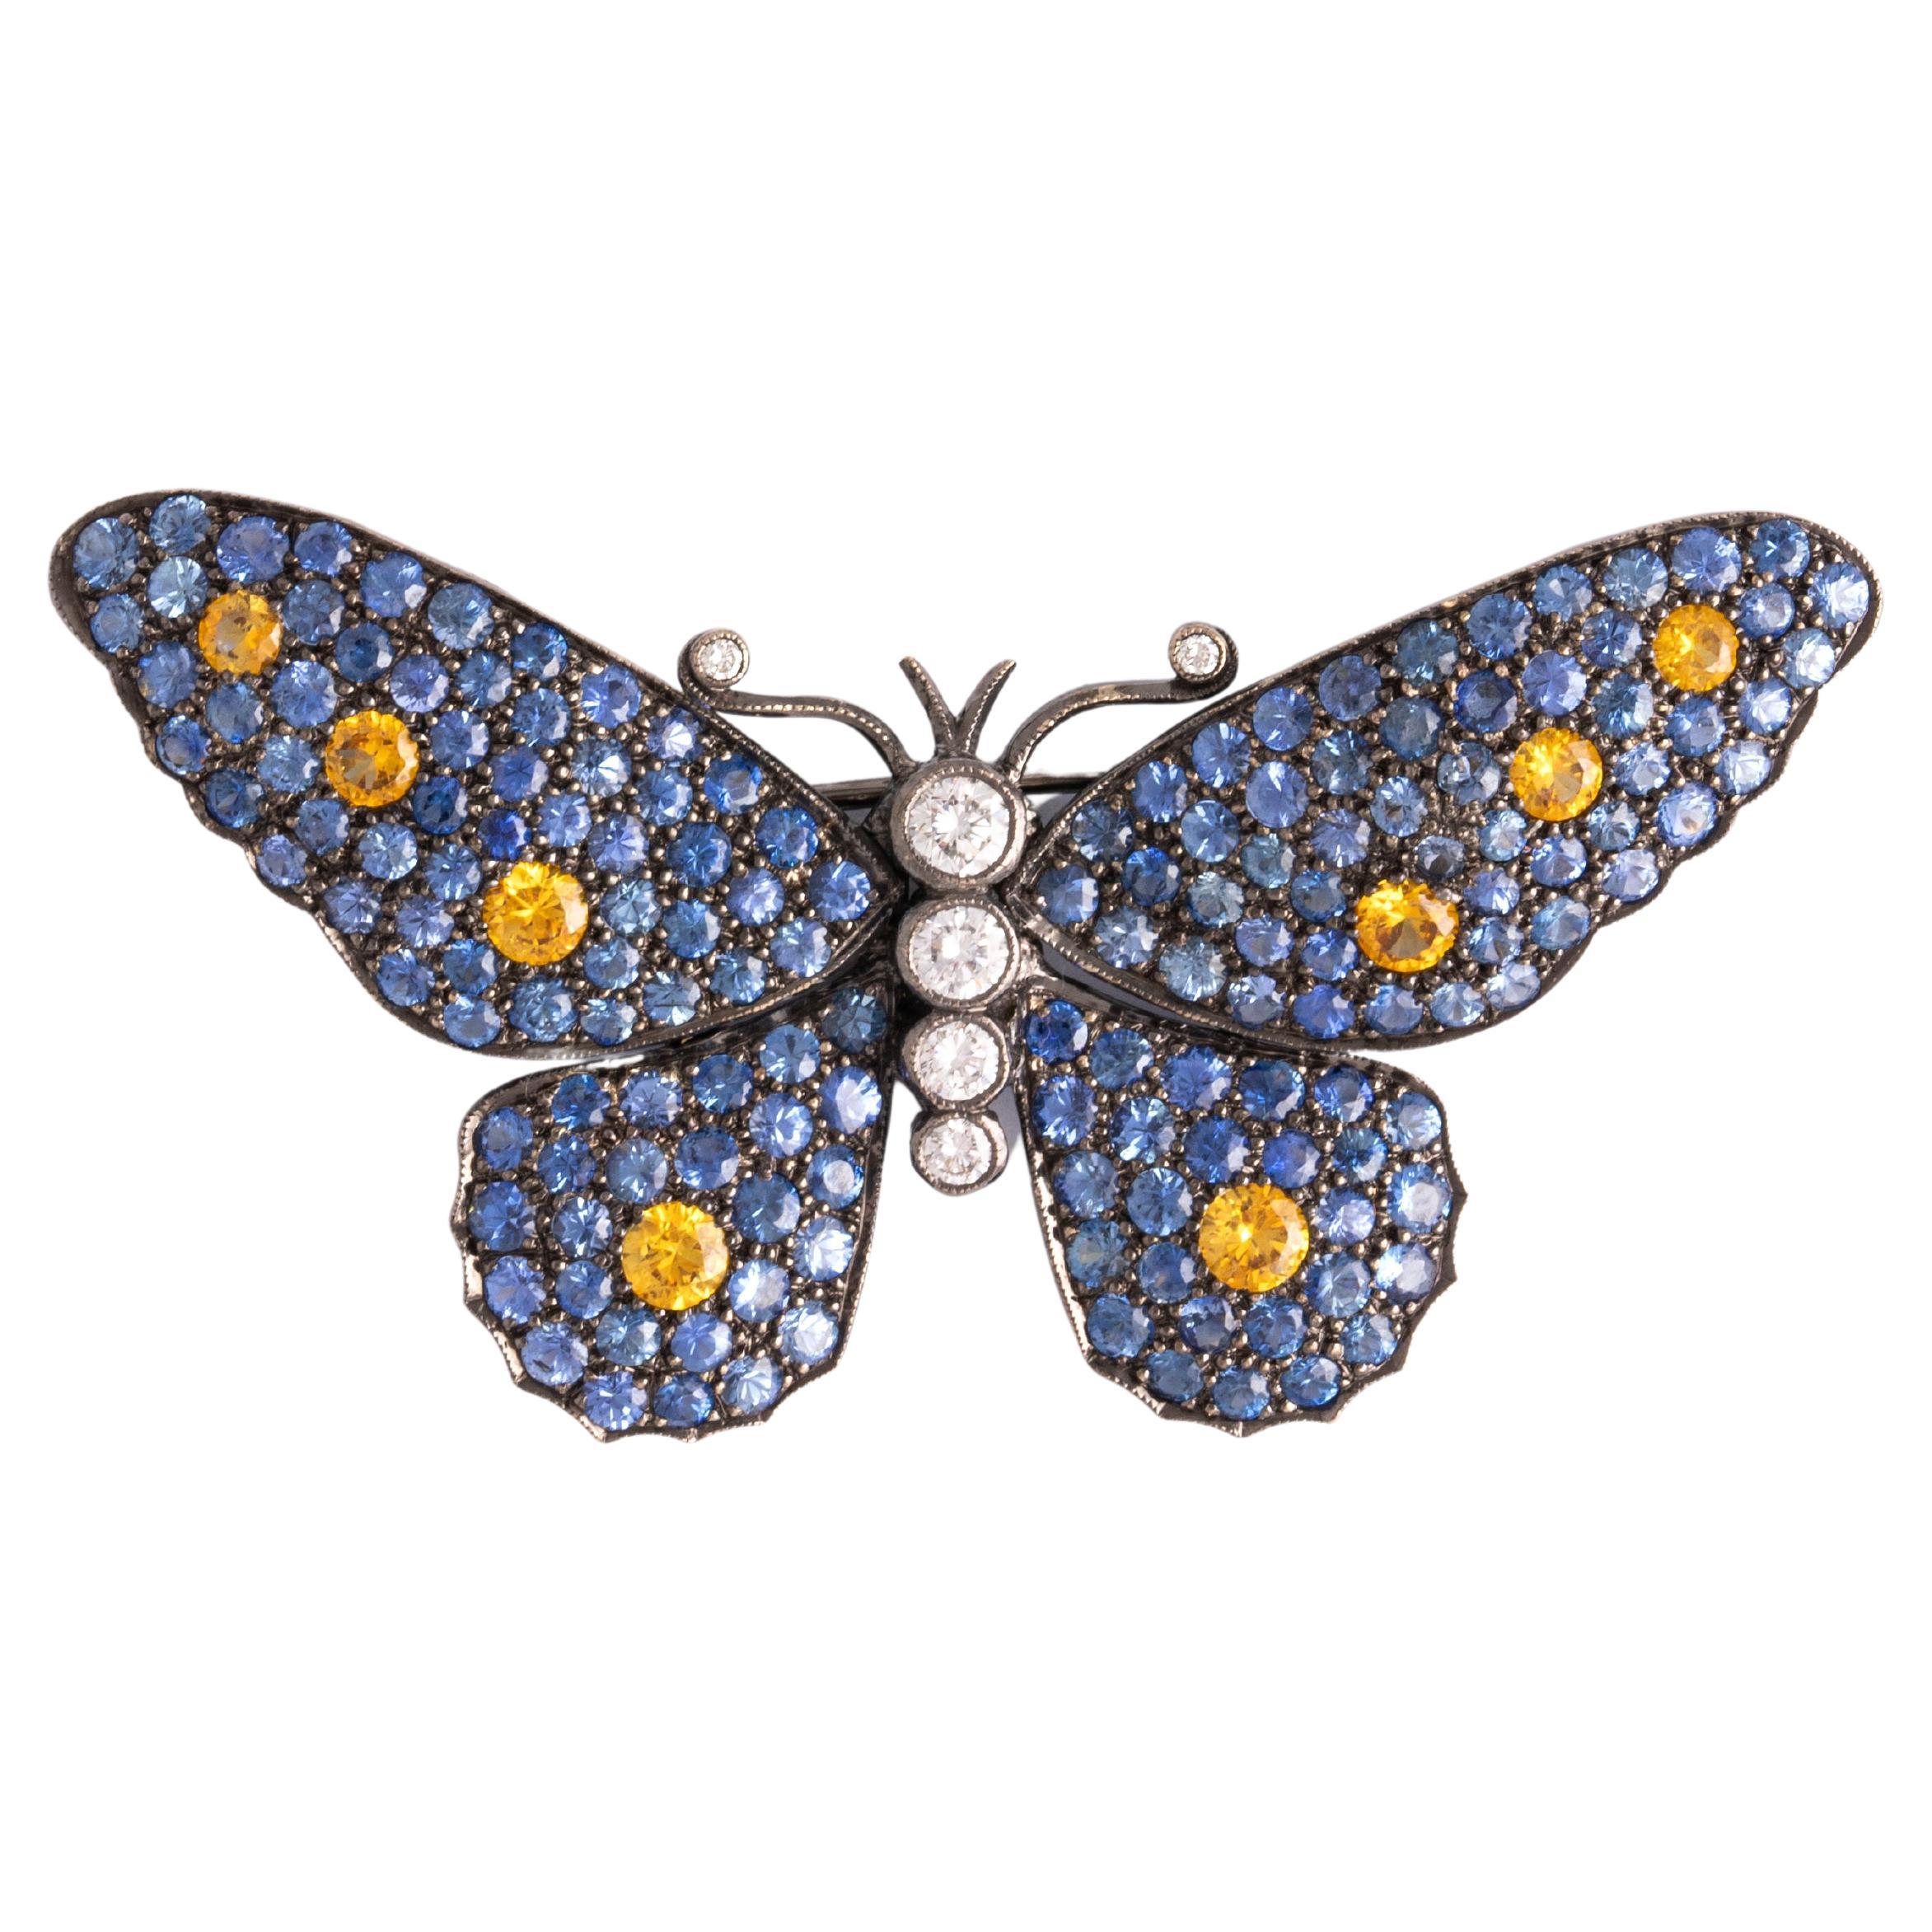 Butterfly Brooch 18K gold blacken set with diamonds and yellow and blue sapphires (treated).
Height: 3.00 centimeters.
Width: 5.70 centimeters.
Total weight: 11.76 grams.
